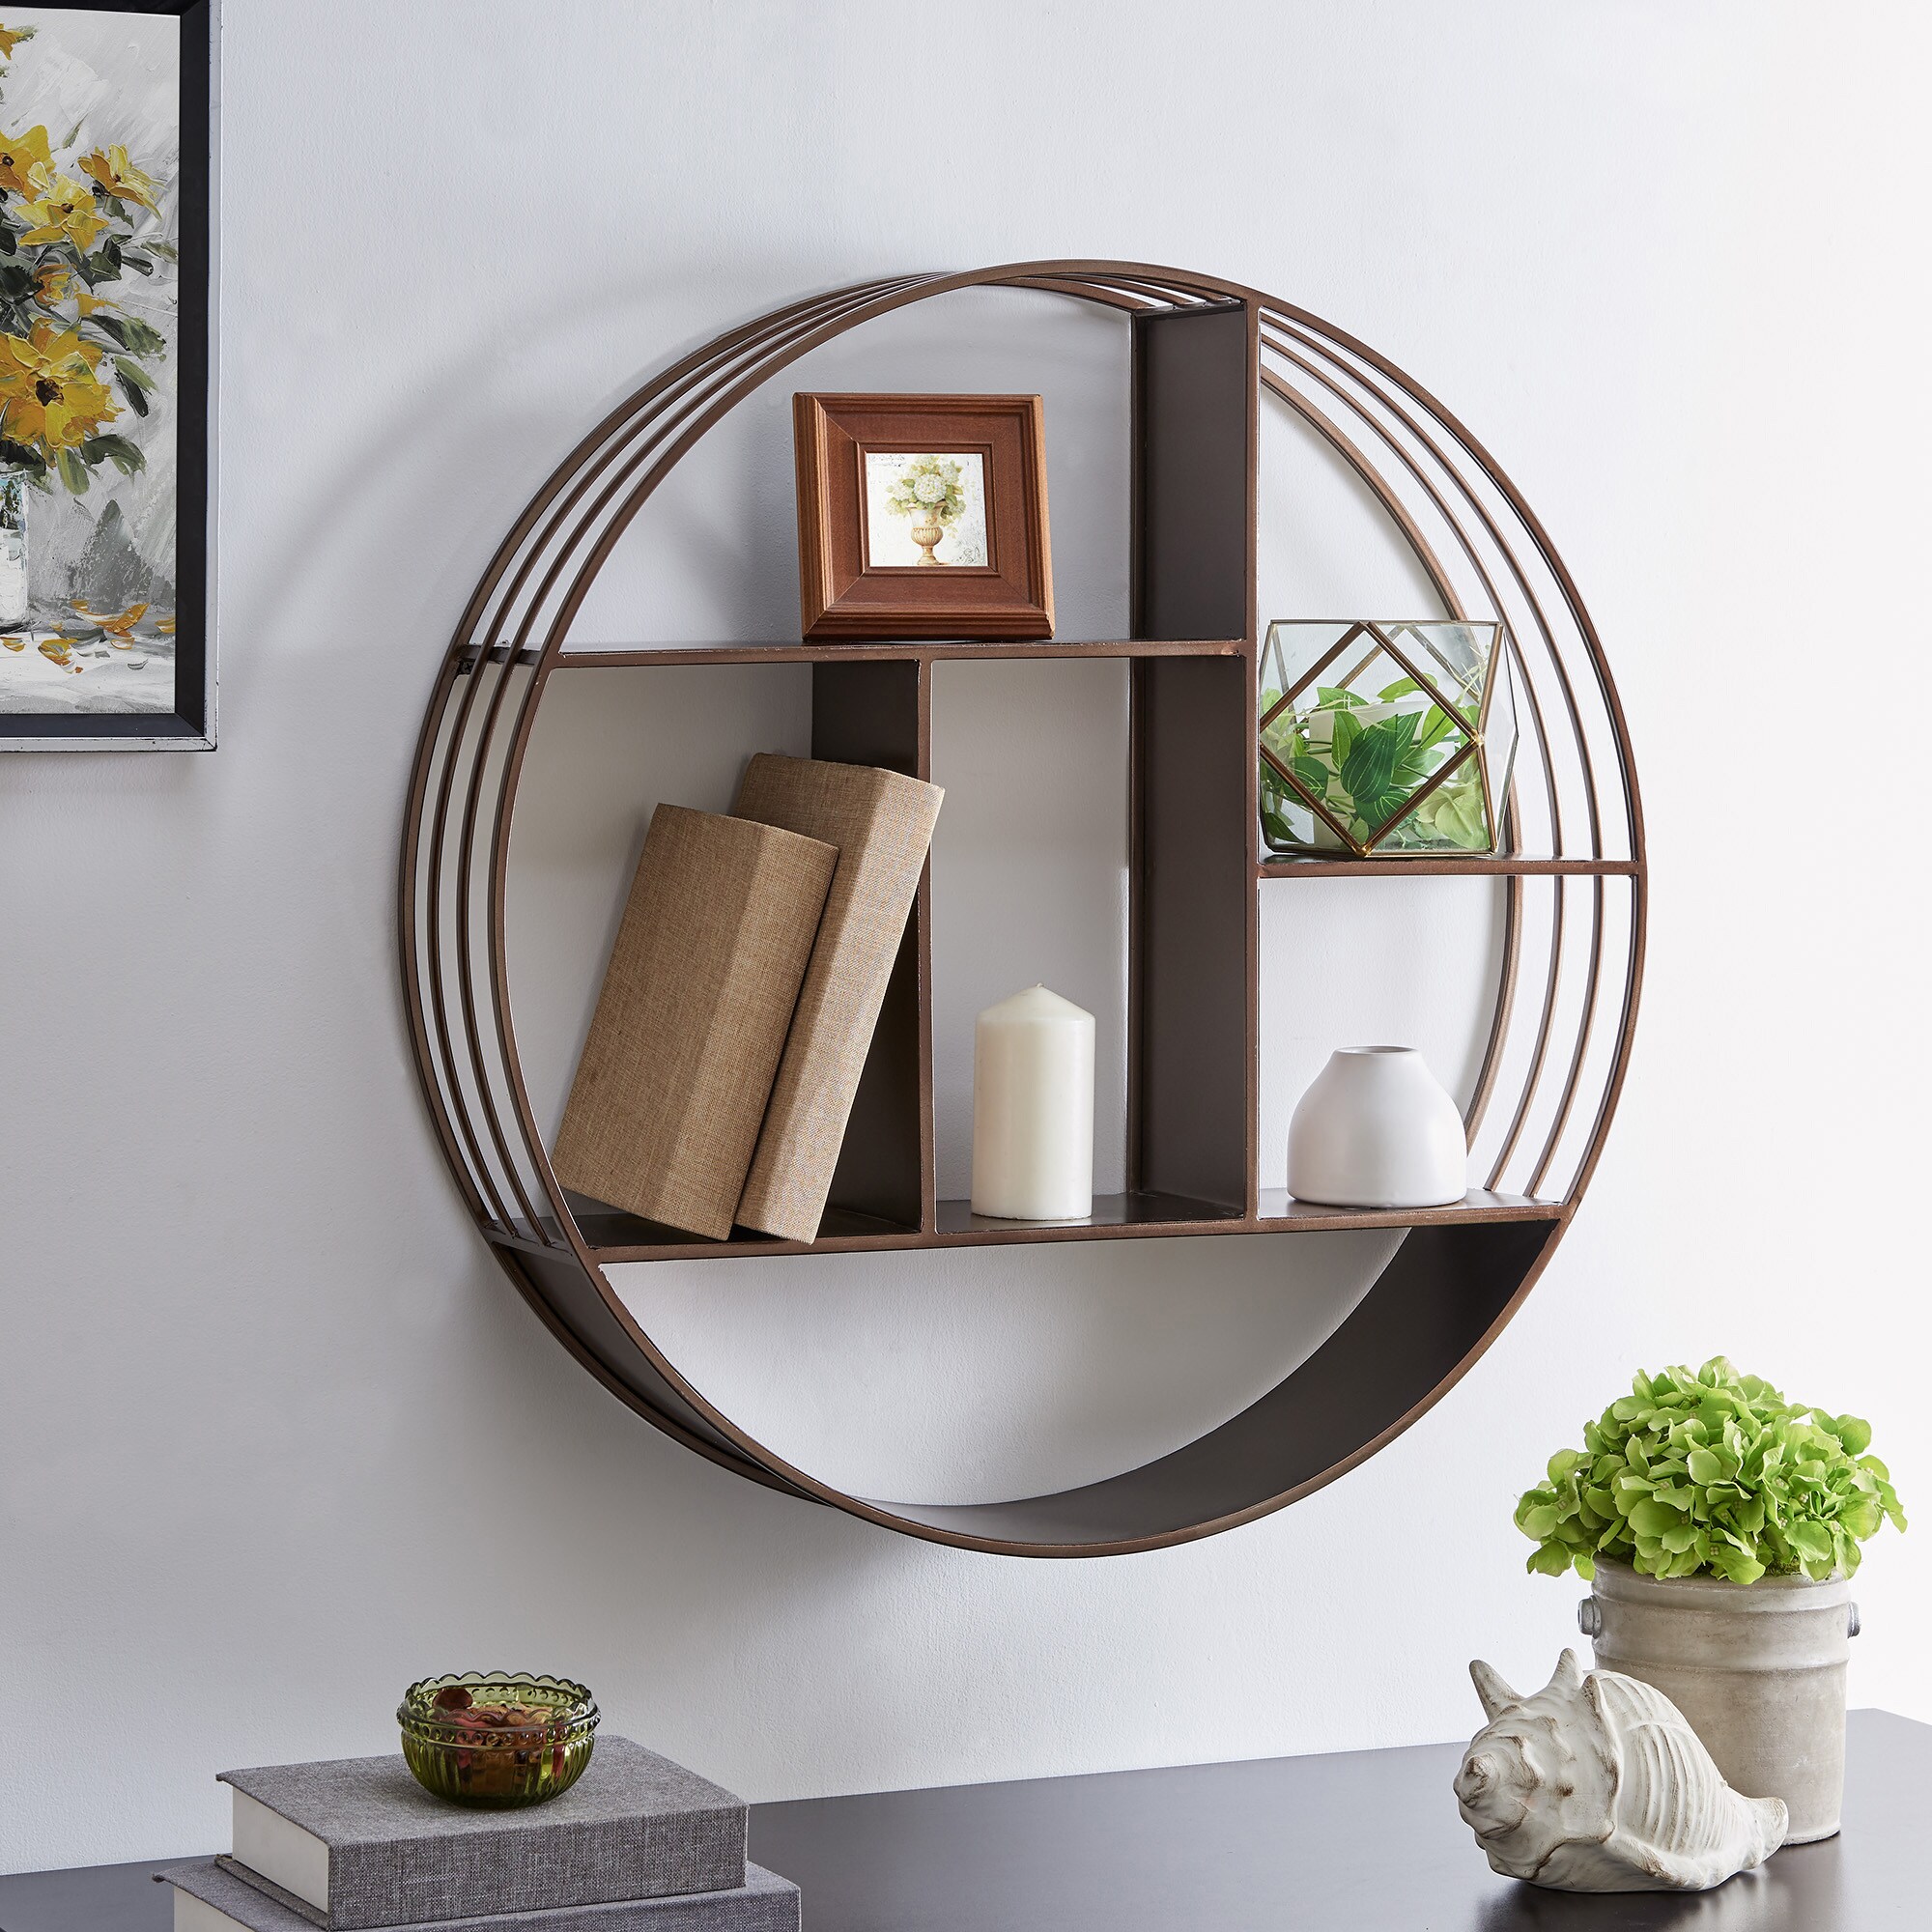 70196 American Crafted FirsTime & Co Bryson Industrial Circular Shelf 27.5 x 6 x 27.5, Aged Brown 